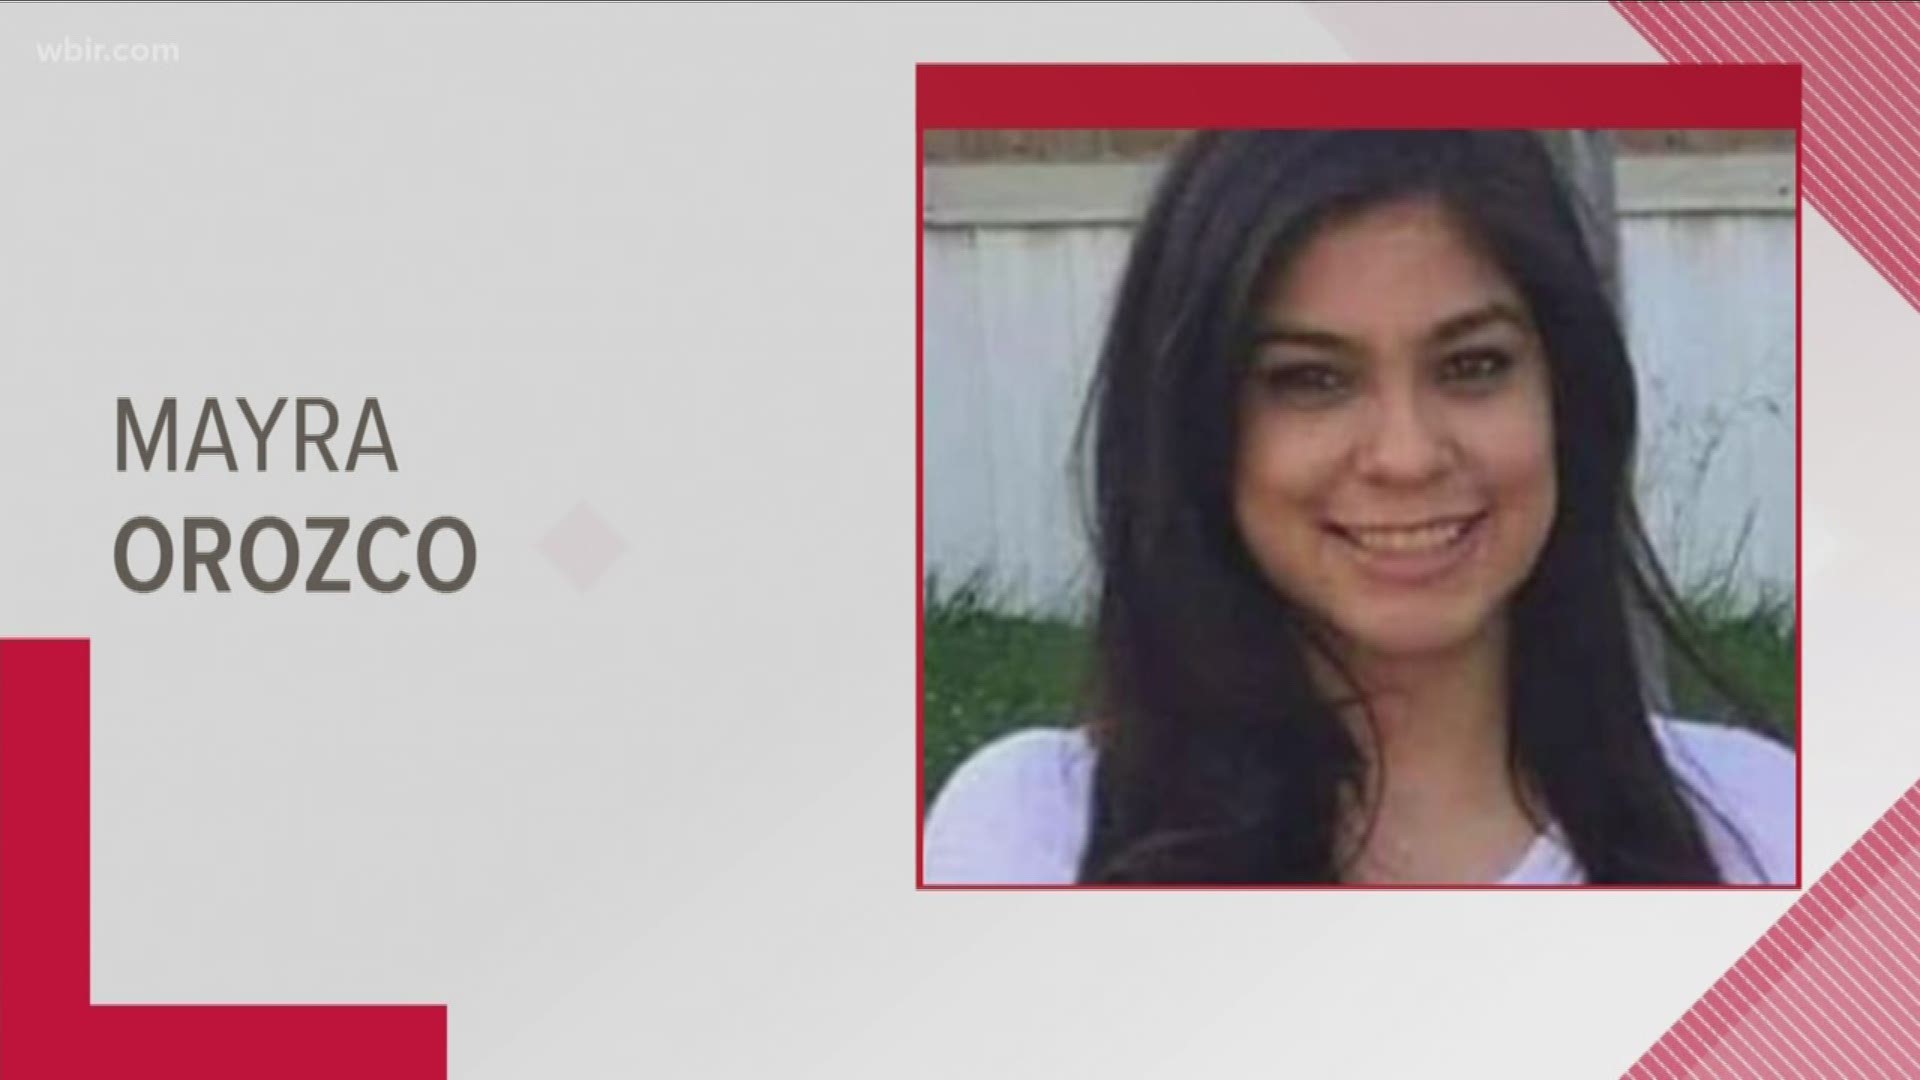 According to KCSO, 22-year-old Mayra Orozco was found safe by 8:15 a.m. Tuesday.